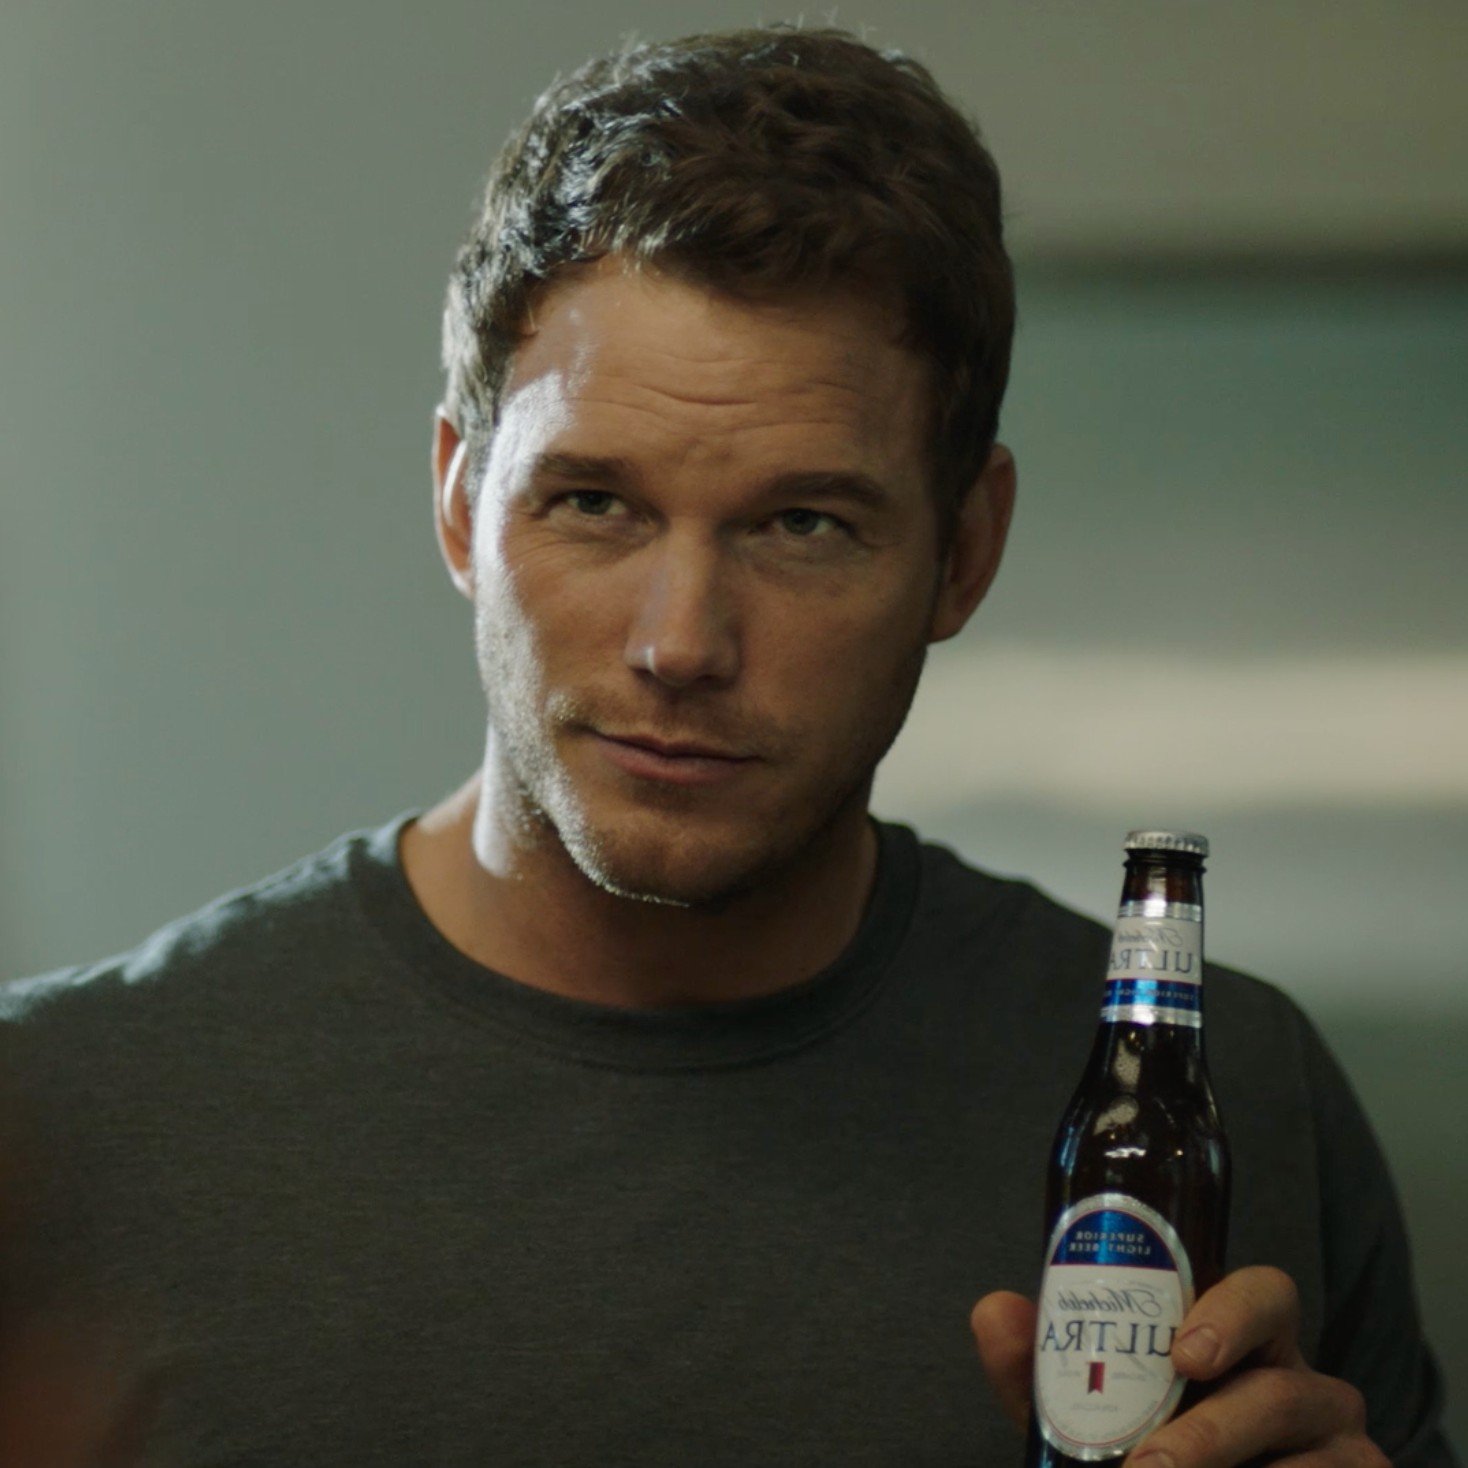 Wishing a very Happy 39th Birthday to actor Chris Pratt whose beer commercials are quite funny! 